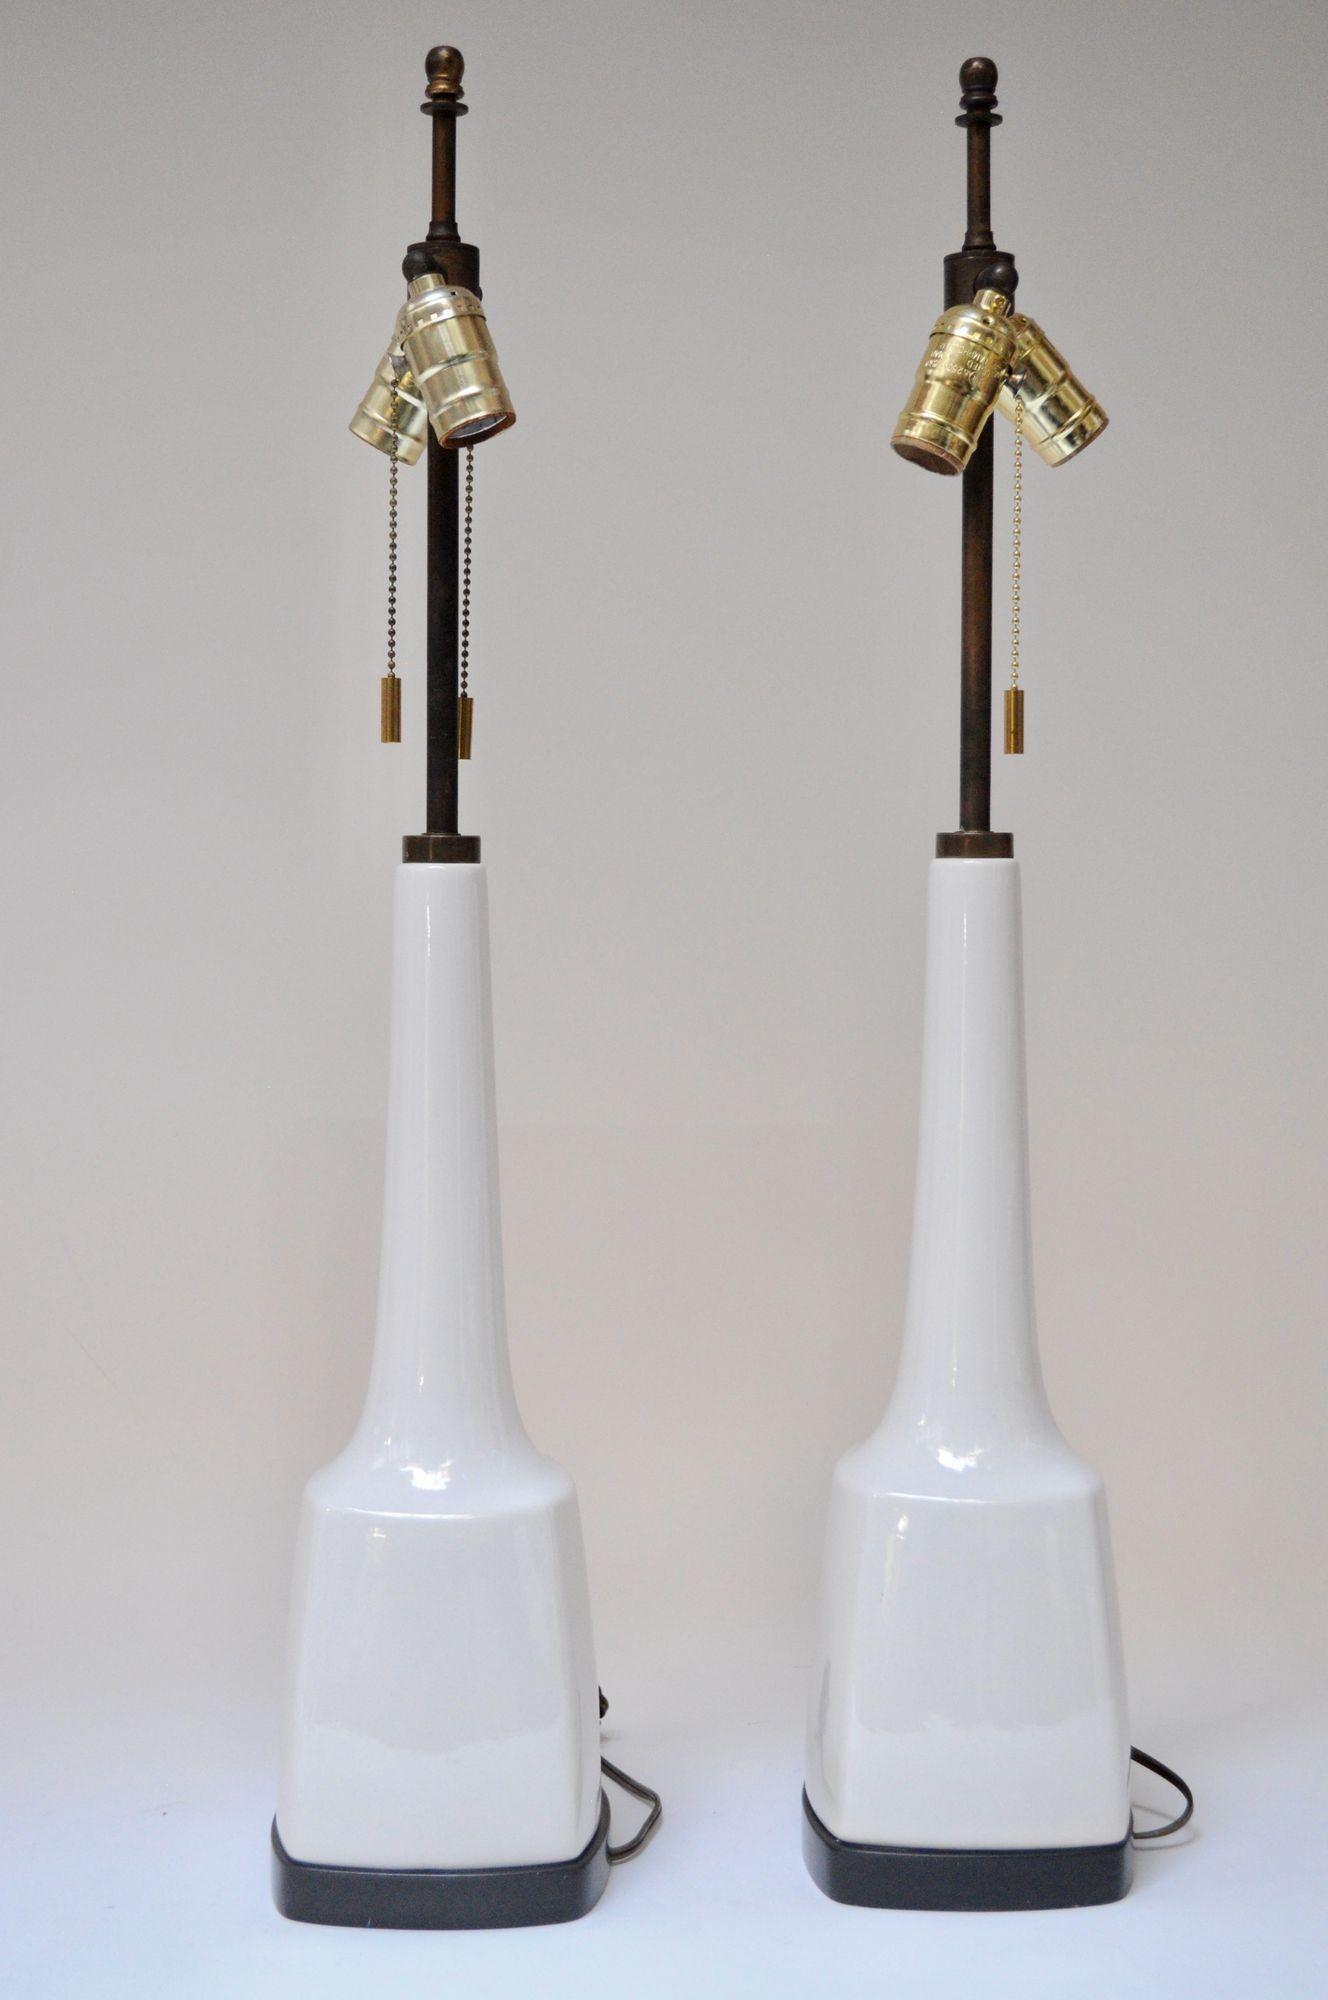 Pair of Mid-Century American Modern tables lamps (ca. 1950s, USA). Composed of patinated brass stems and white porcelain forms, all supported by square ebonized wooden platform bases. Along with the wiring, the dual brass sockets and on/off pull